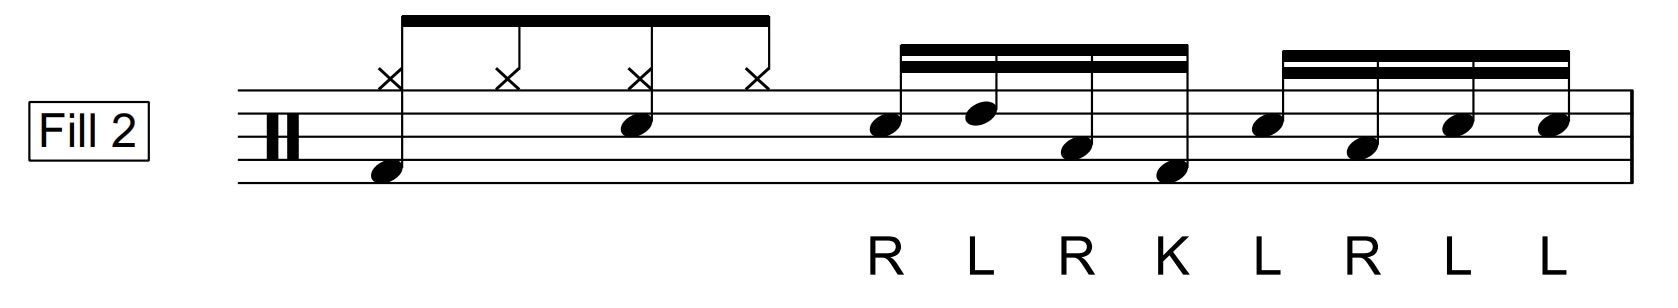 Paradiddle Fills